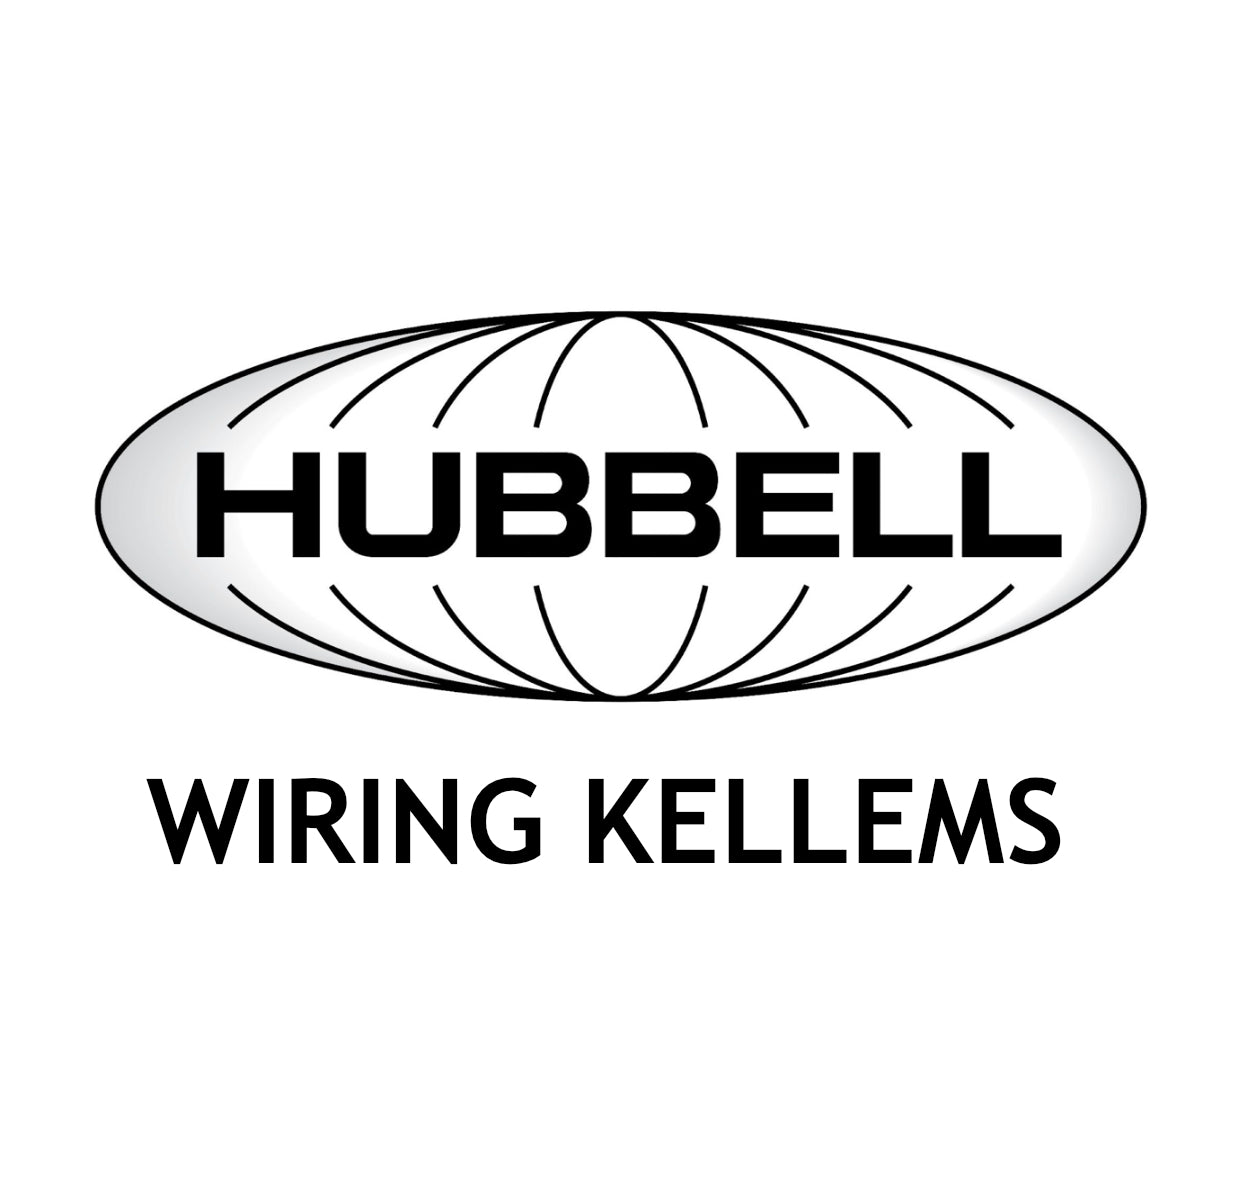 HUBBELL WIRING KELLEMS